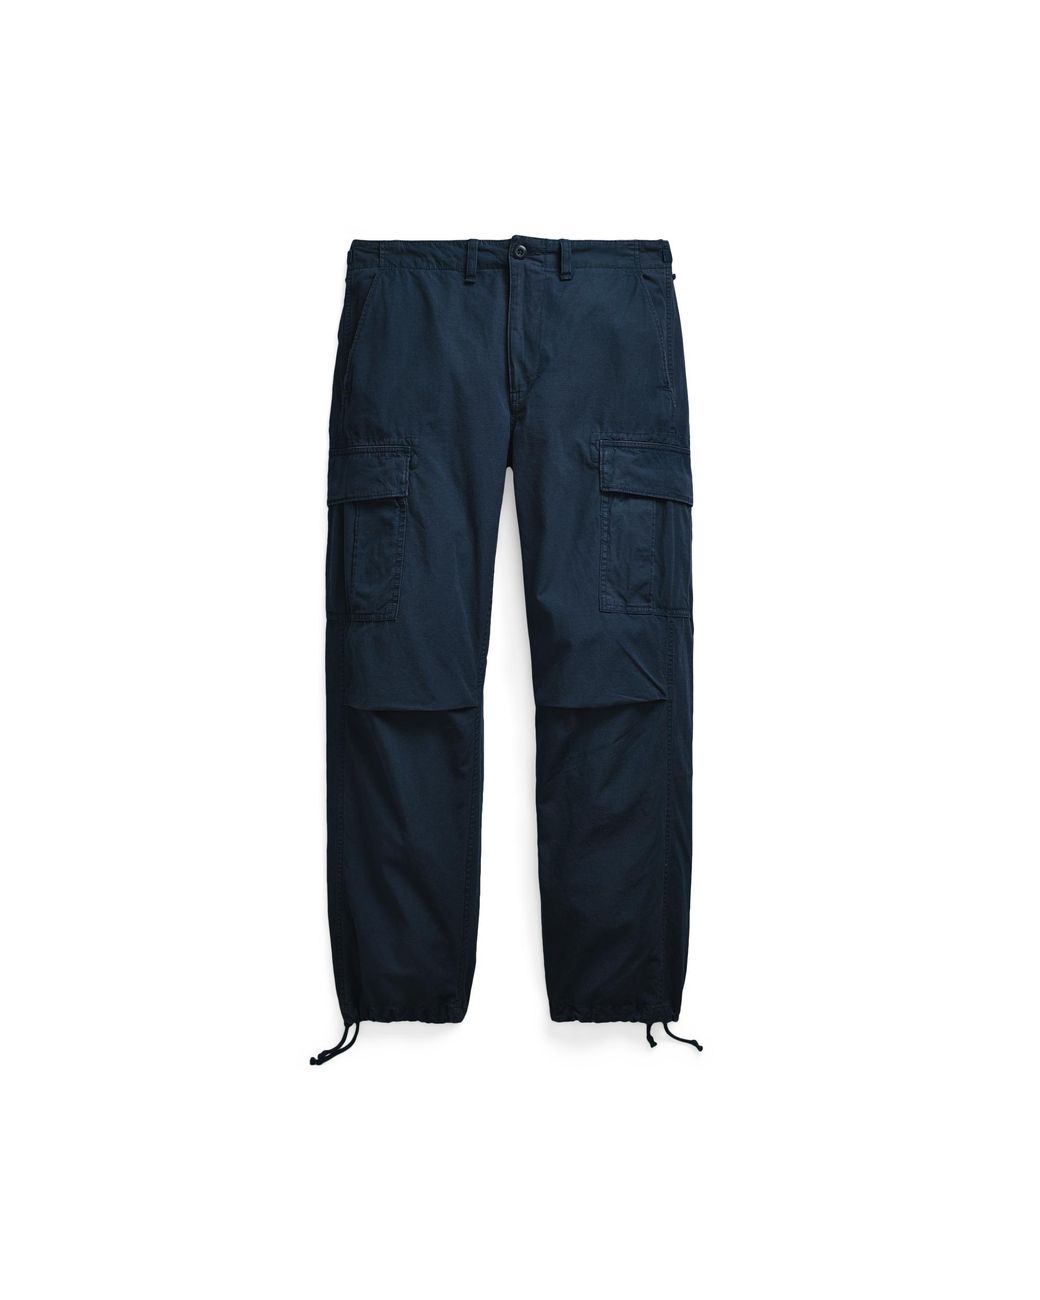 Ralph Lauren Cotton Relaxed Fit Ripstop Cargo Pant in Blue for Men - Lyst